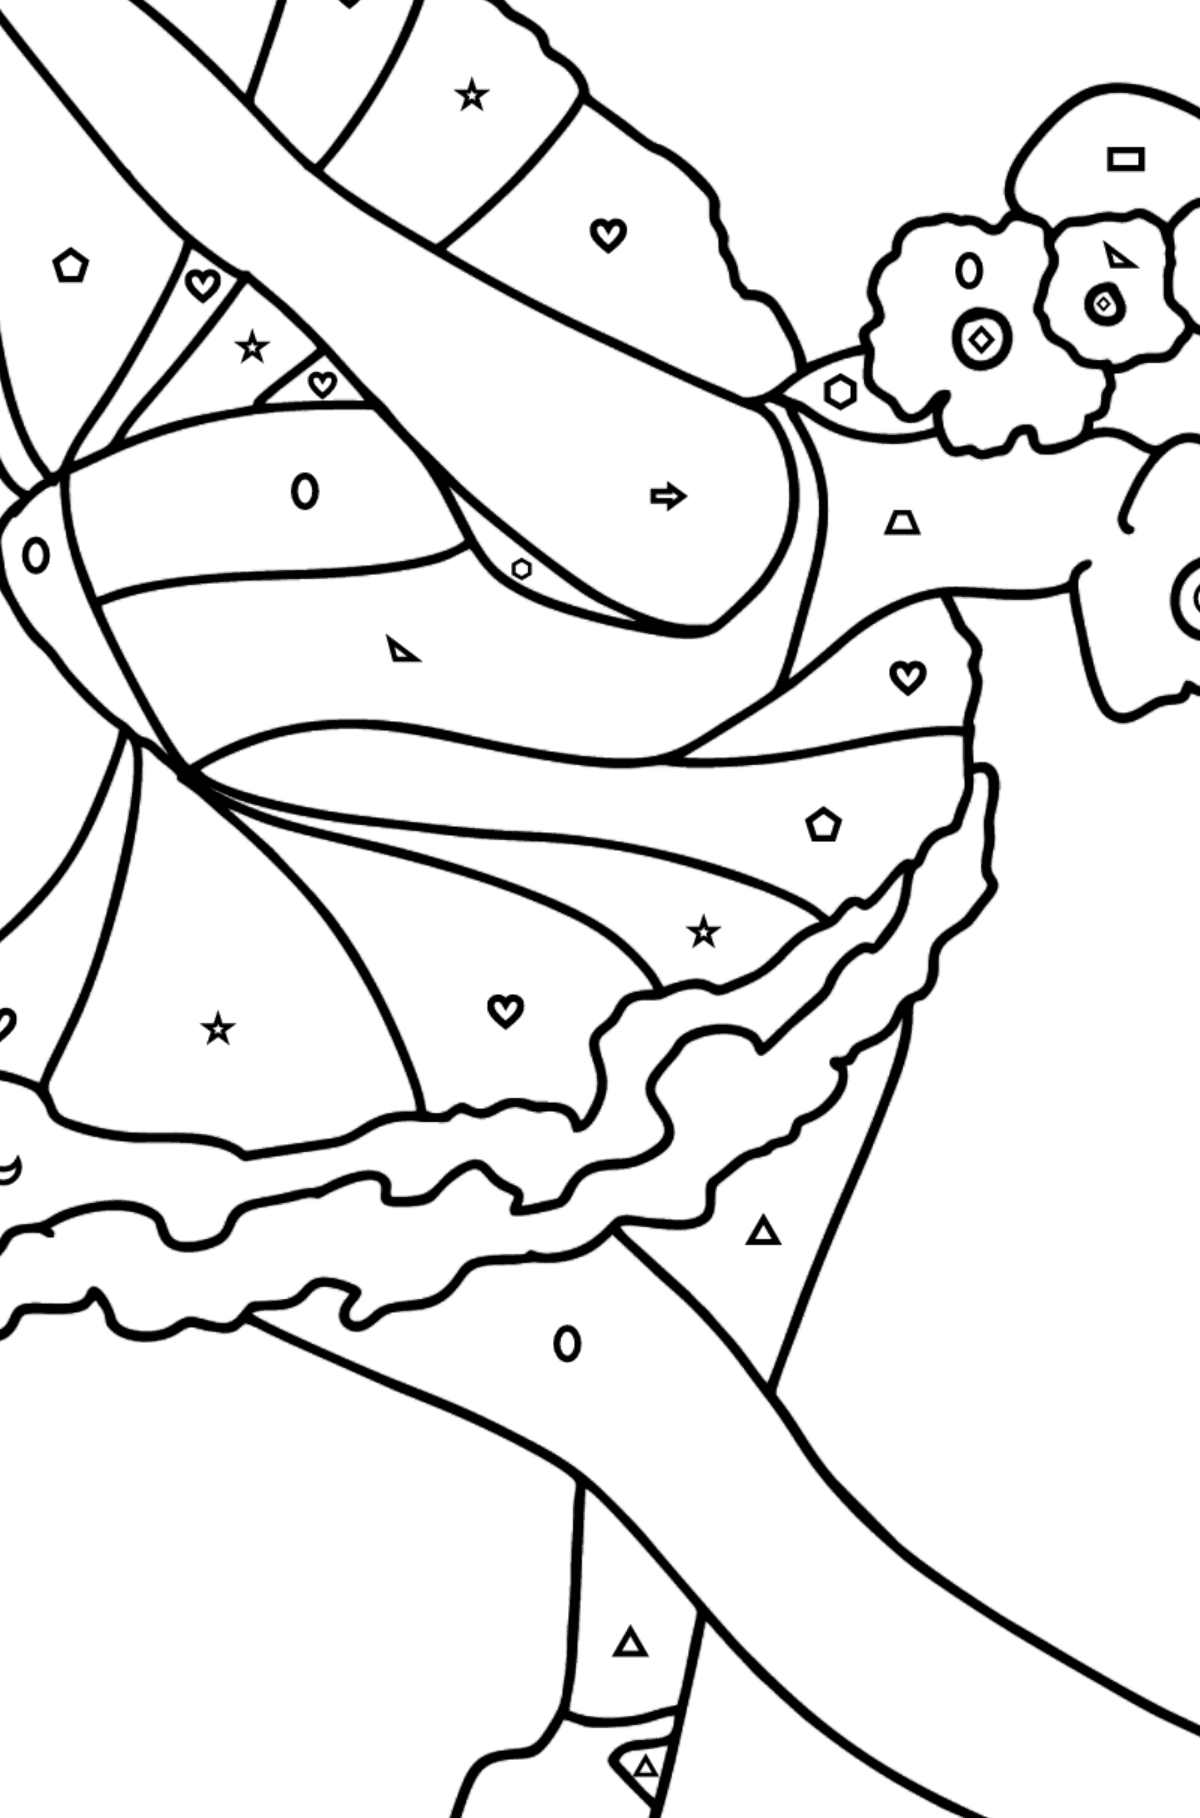 Ballerina Bowing coloring page - Coloring by Geometric Shapes for Kids